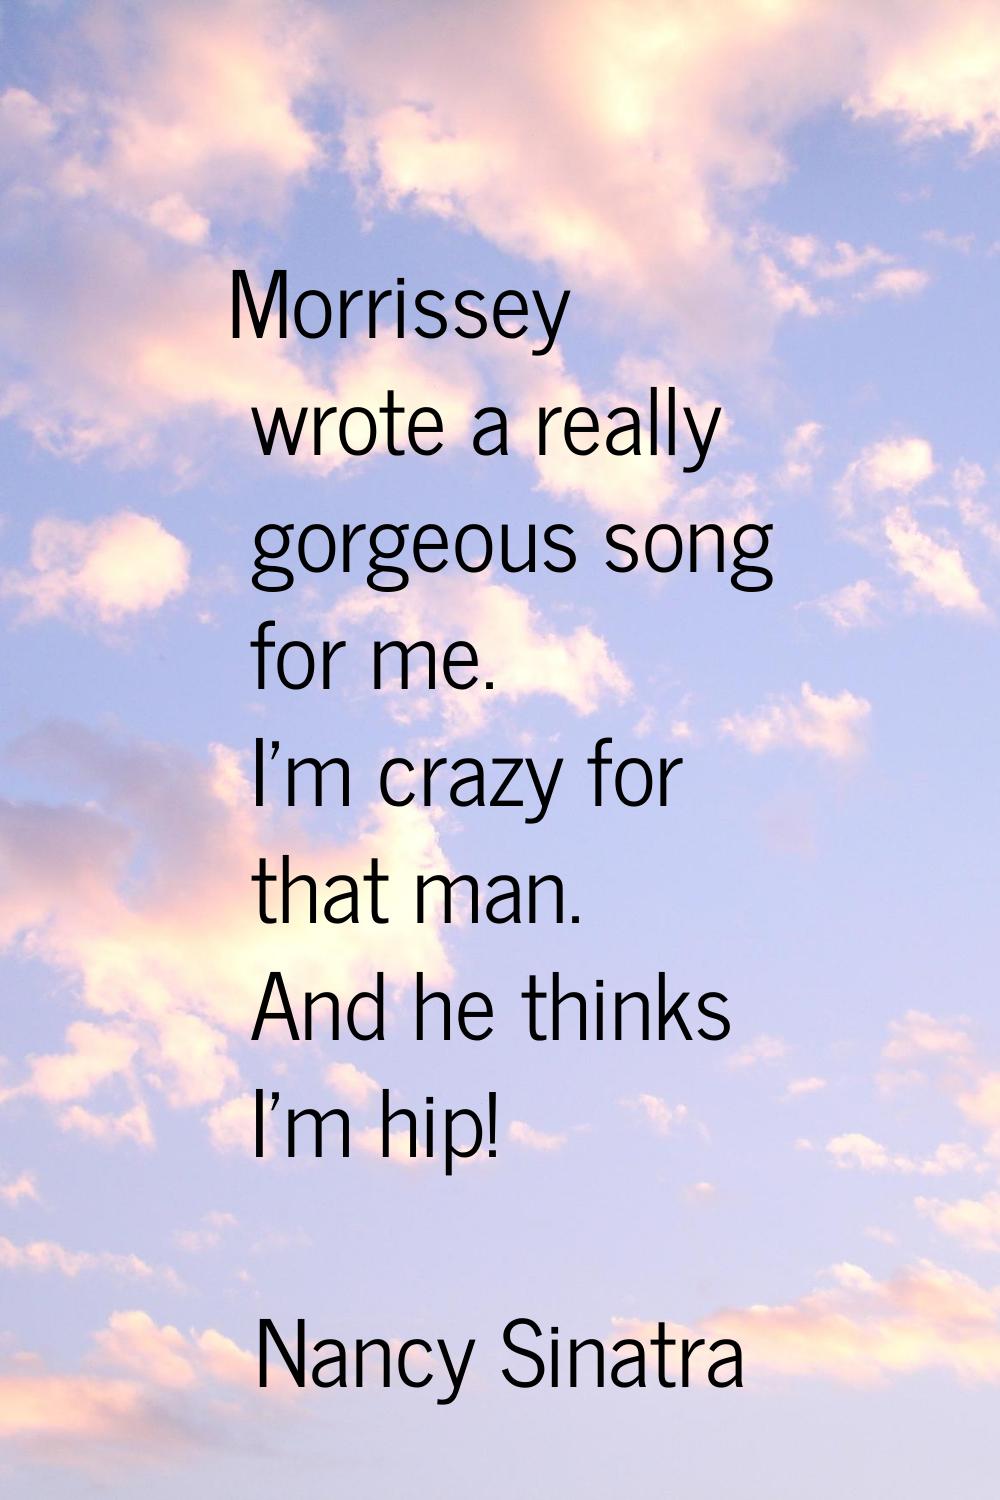 Morrissey wrote a really gorgeous song for me. I'm crazy for that man. And he thinks I'm hip!